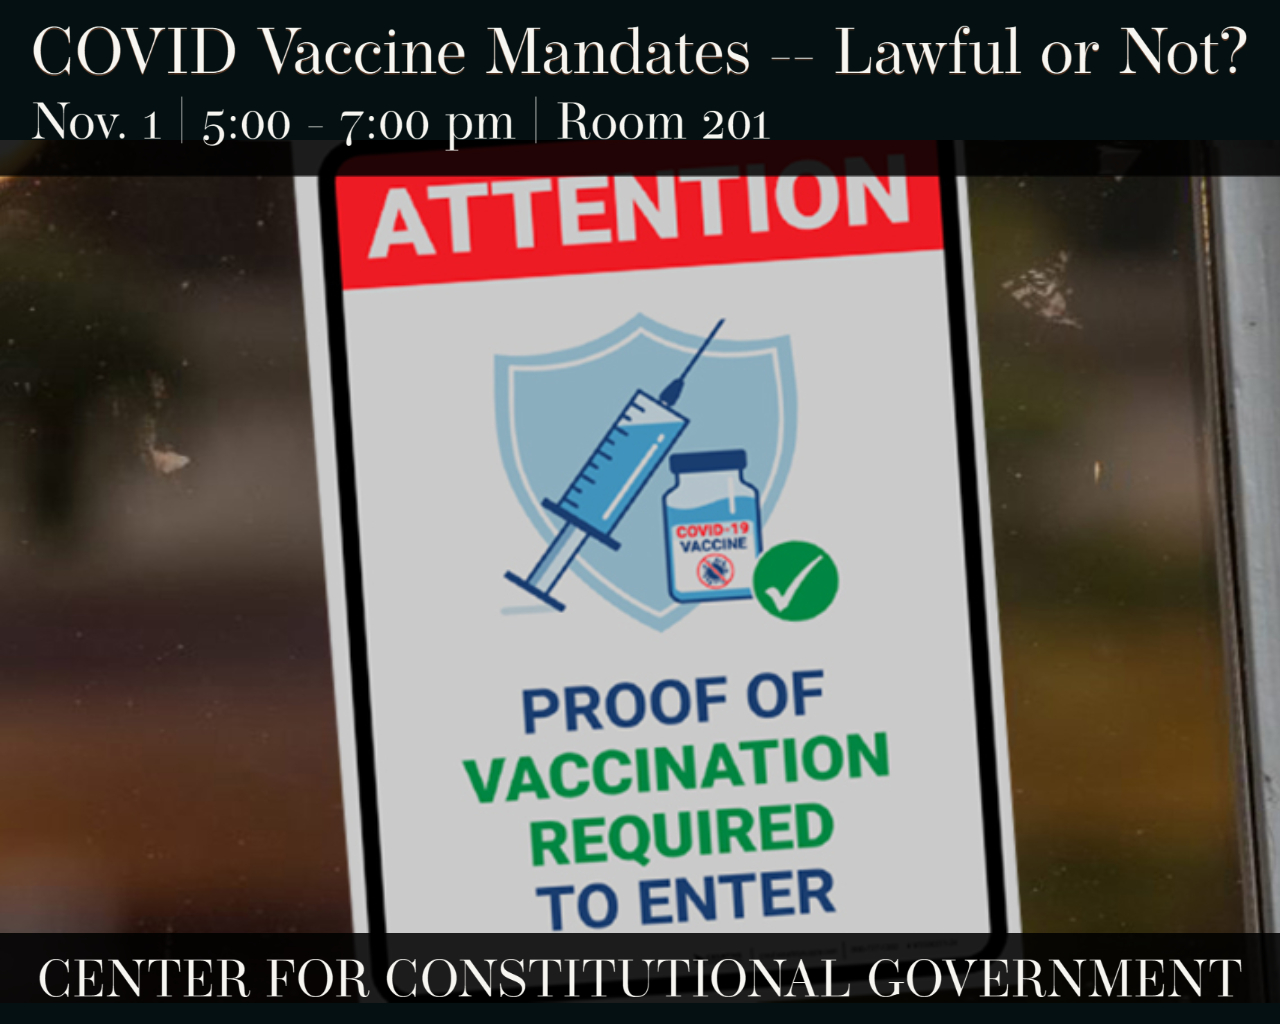 COVID Vaccine Mandates -- Lawful or Not Nov. 1 2021 5:00 pm - 7:00 pm Room 201 Center for Constitutional Government 